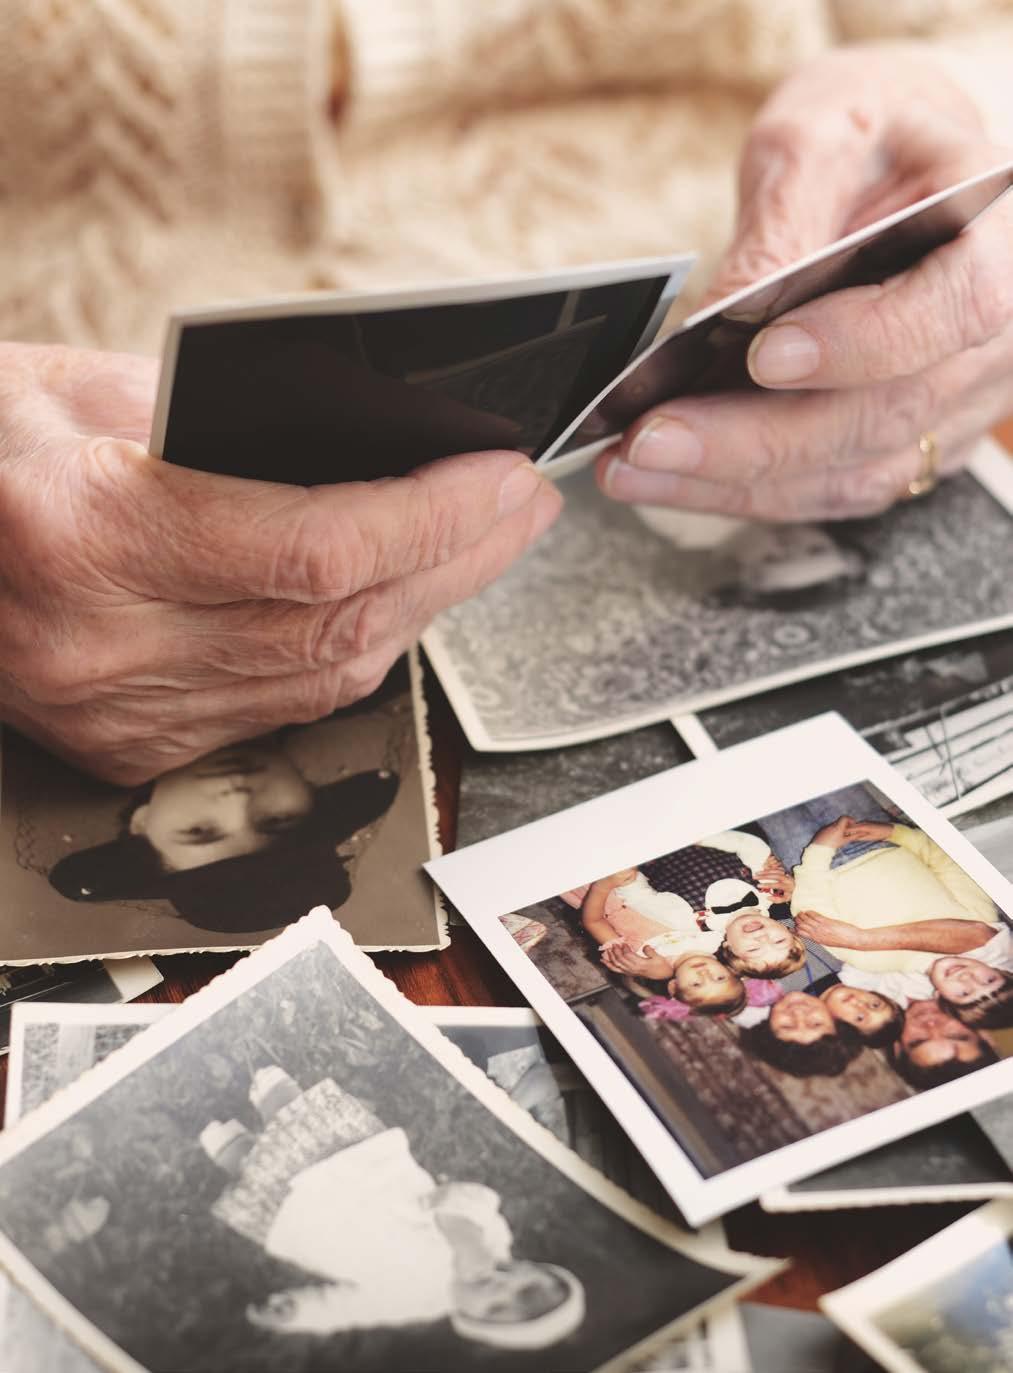 About MyHeritage MyHeritage is the leading destination to discover, share and preserve your family history.